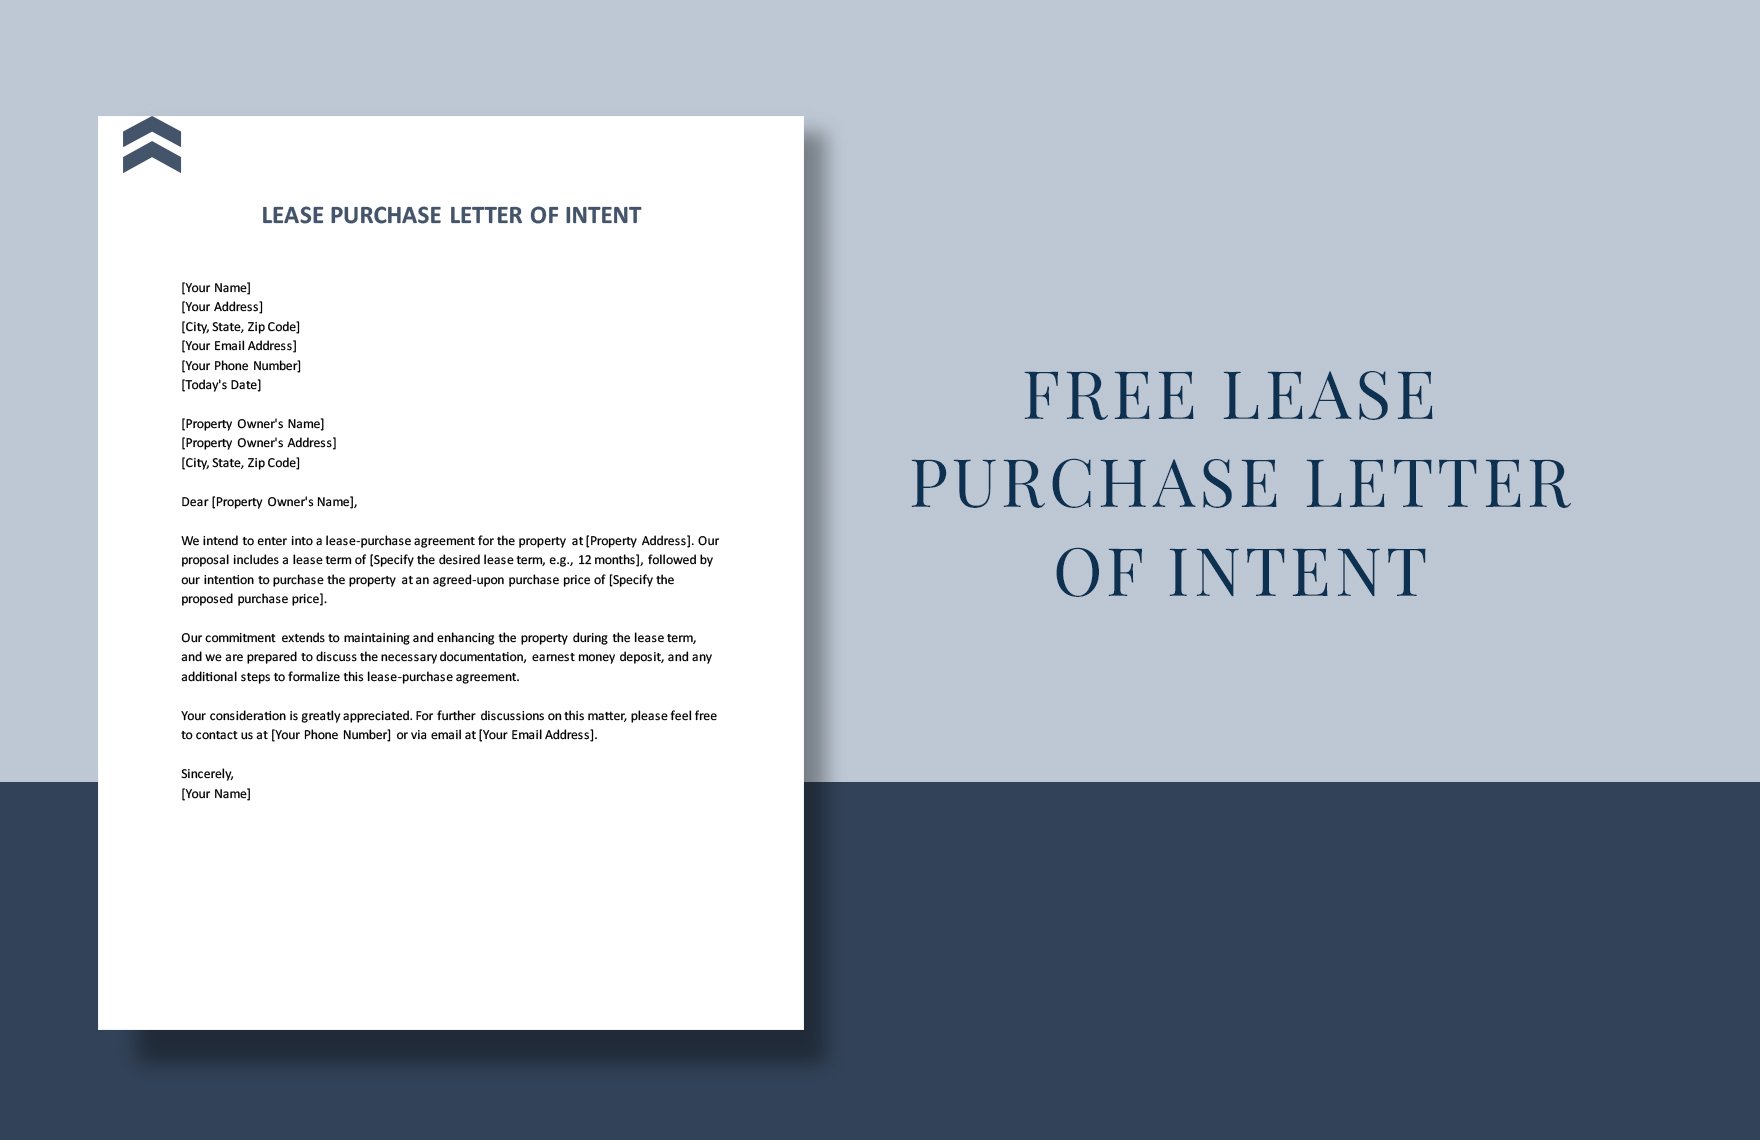 Lease Purchase Letter Of Intent